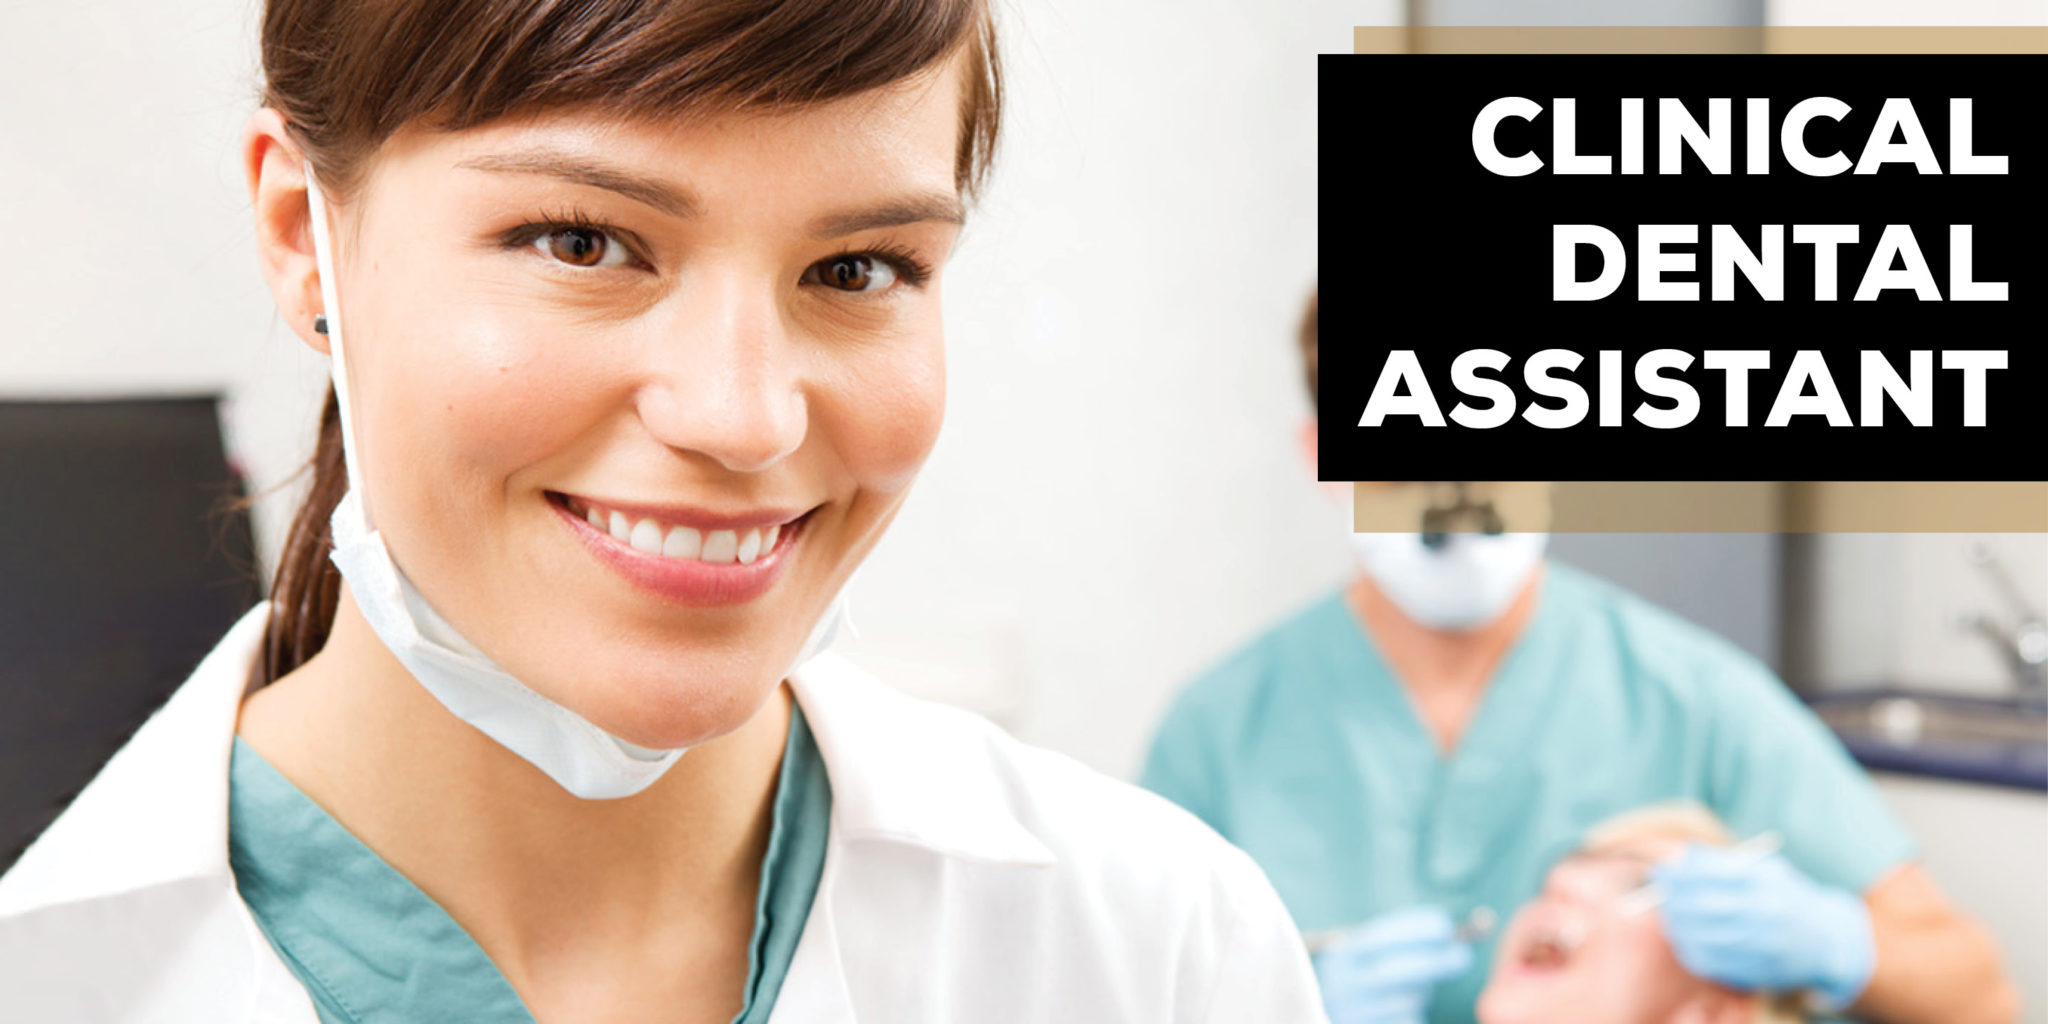 CLINICAL DENTAL ASSISTANT